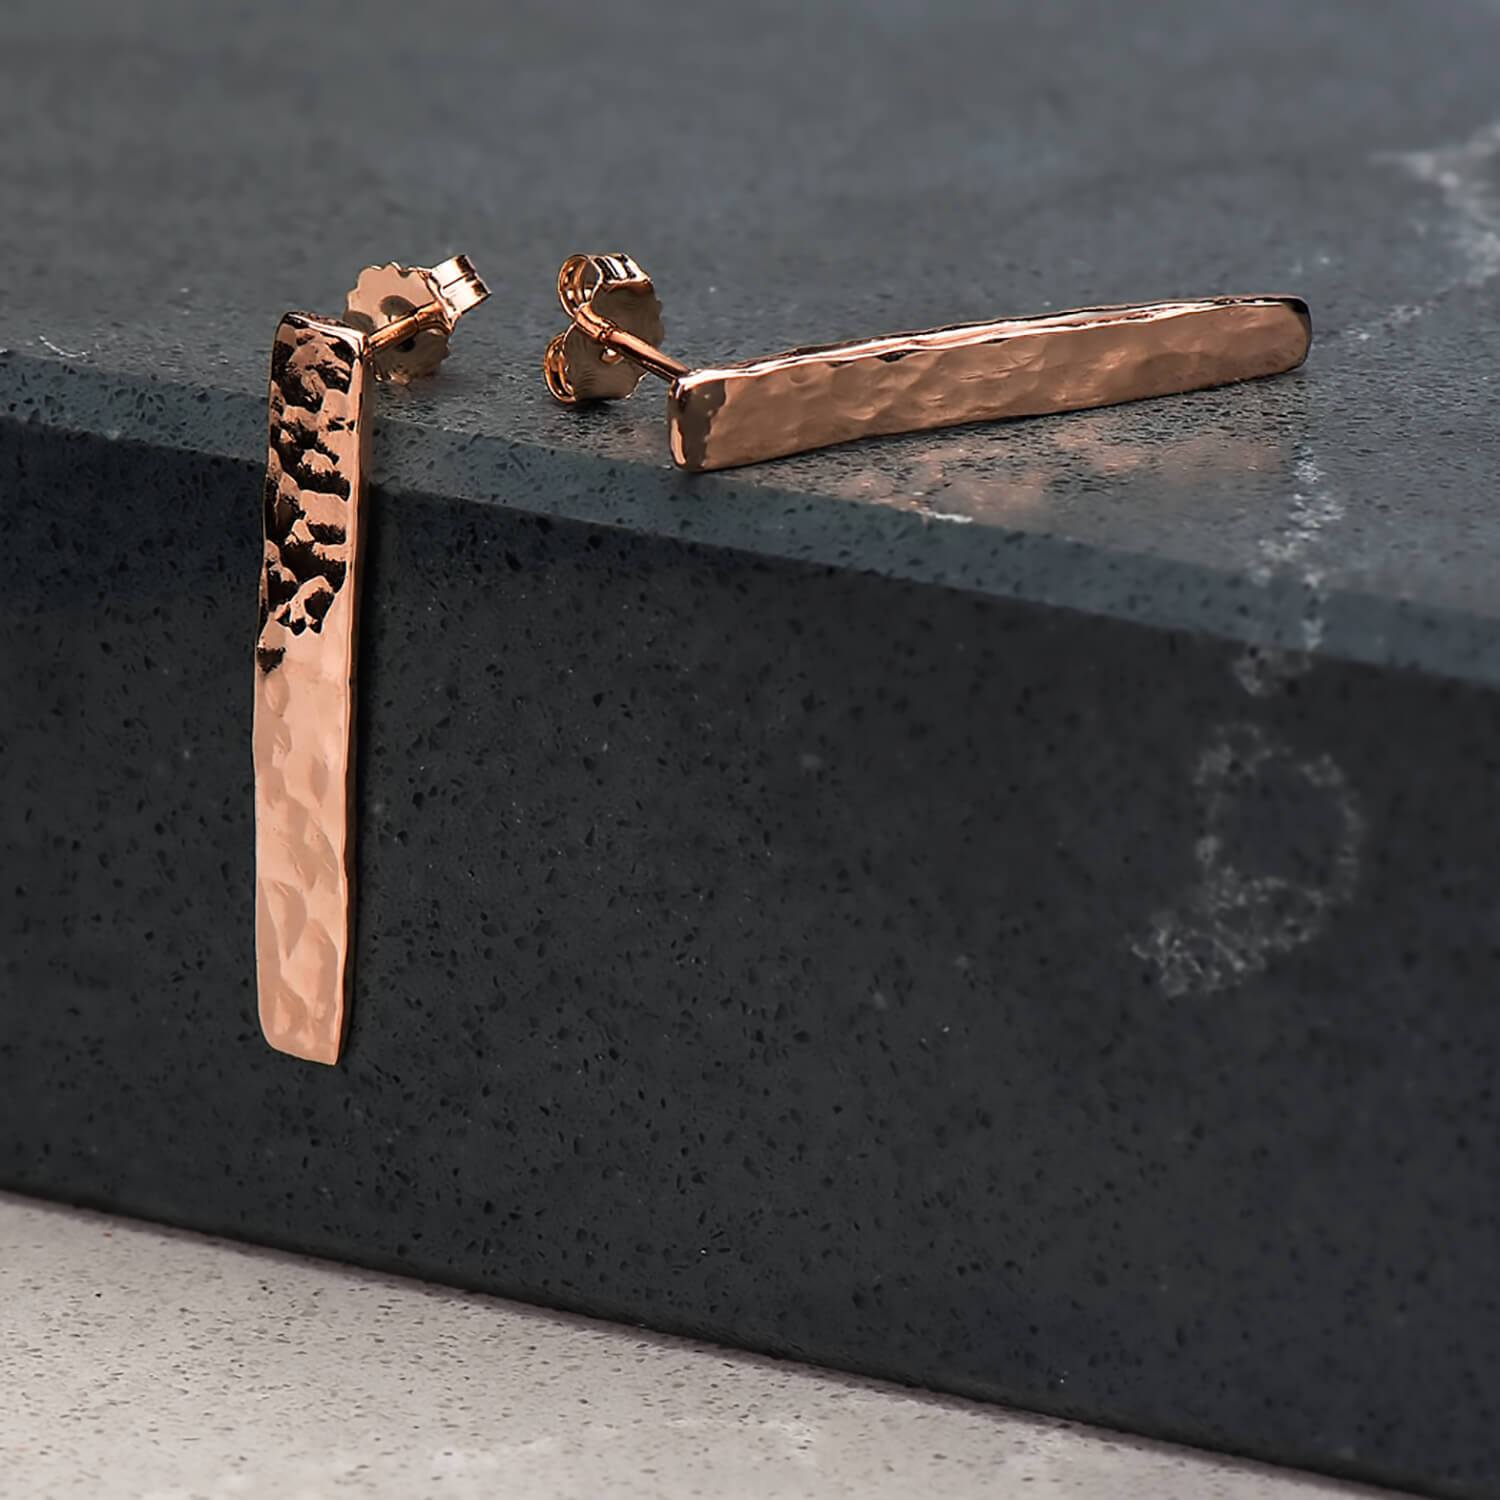 Recycled 10 karat rose gold hammer finished drop rectangular earrings brought to a polished finish